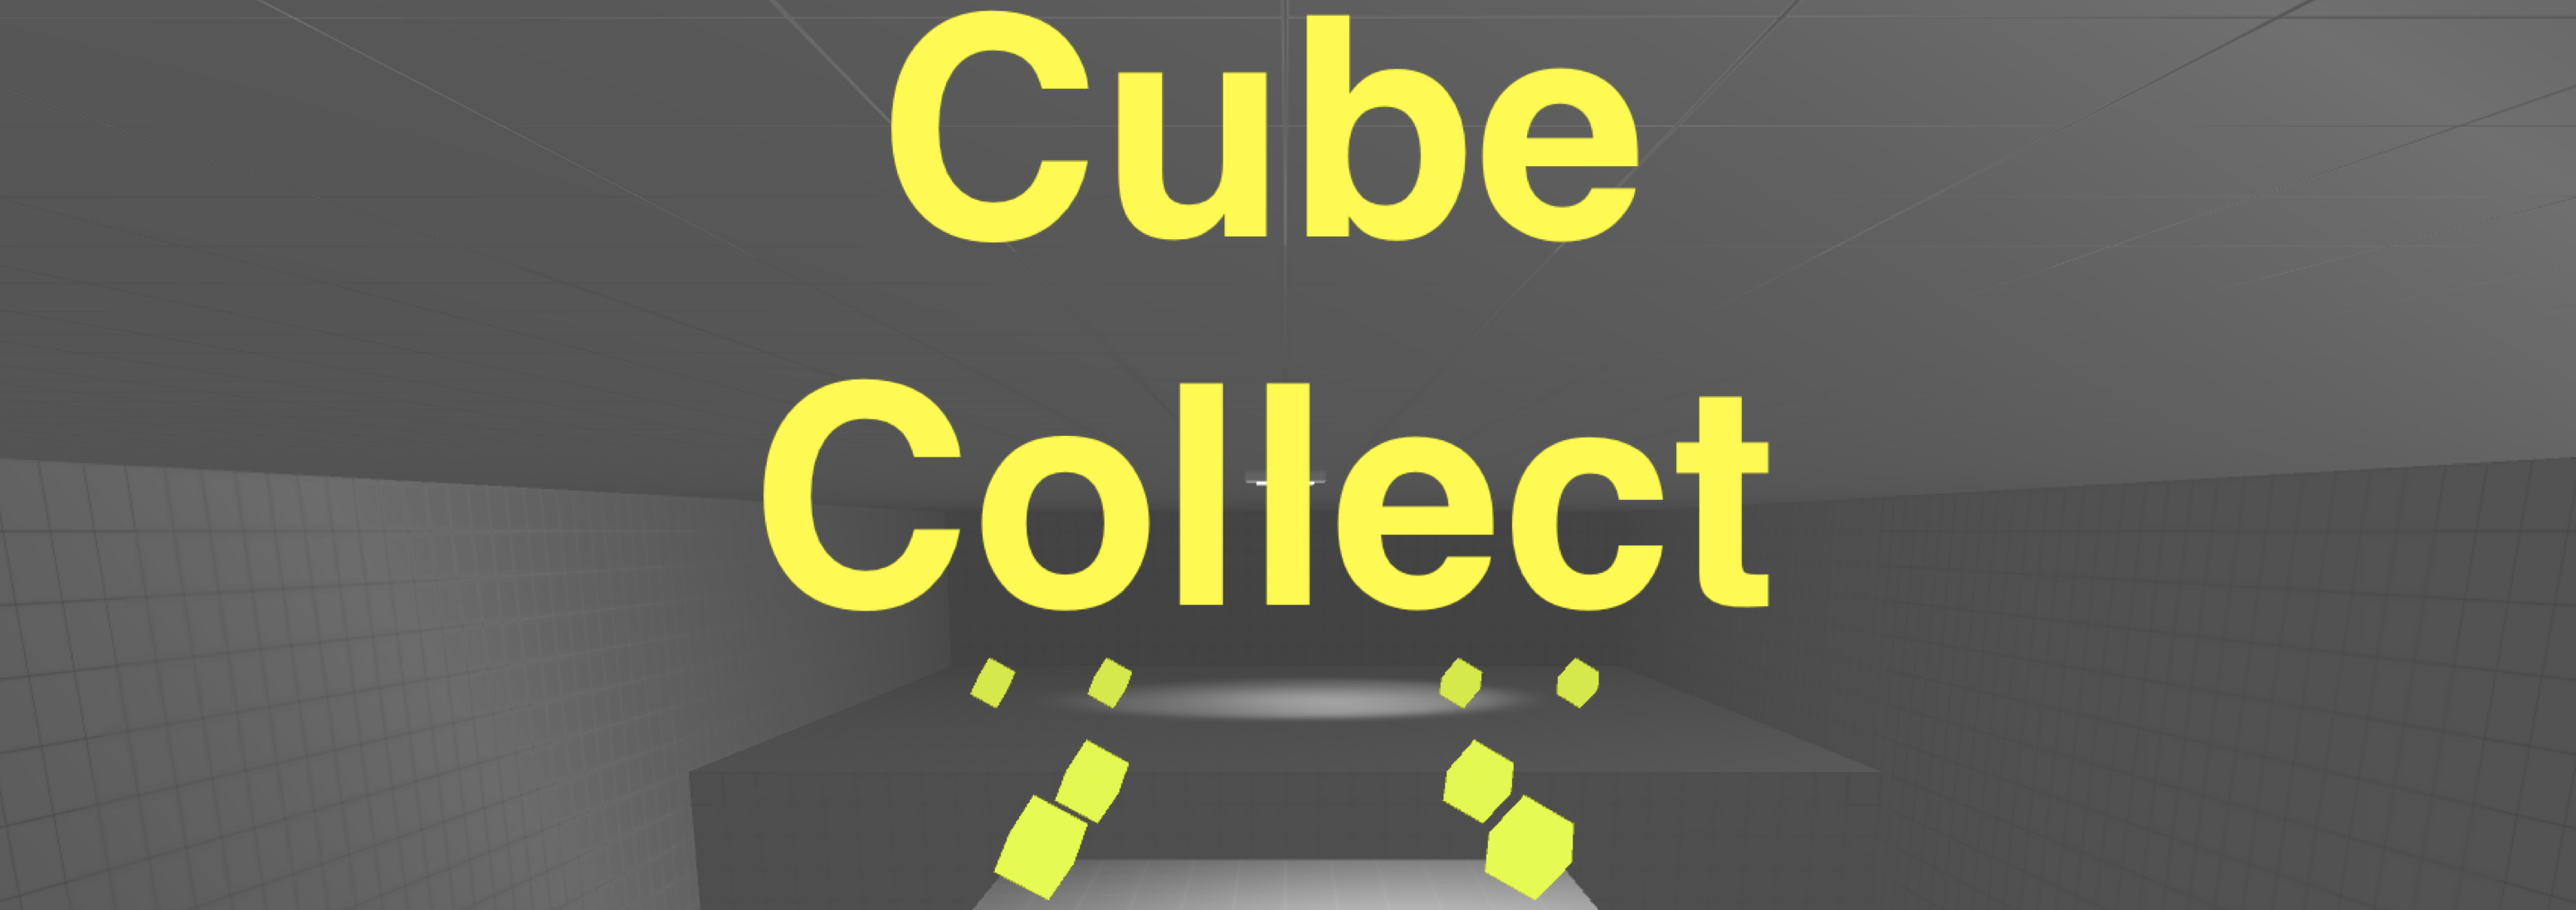 Cube Collect Music